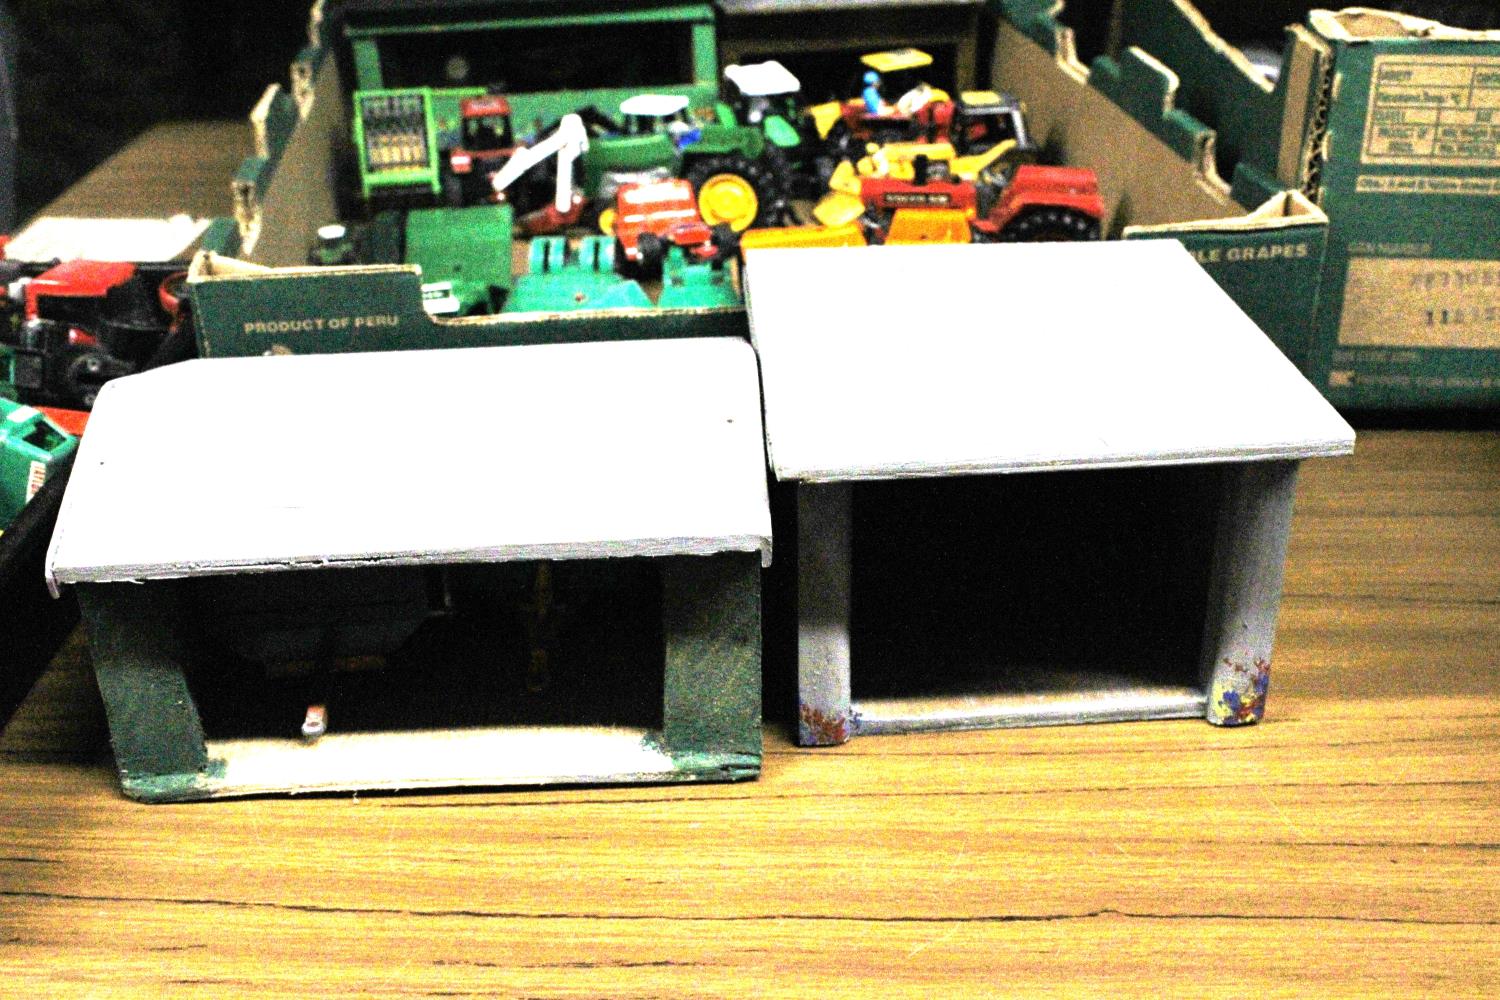 A QUANTITY OF FARM RELATED TOYS AND BUILDINGS - Image 2 of 4